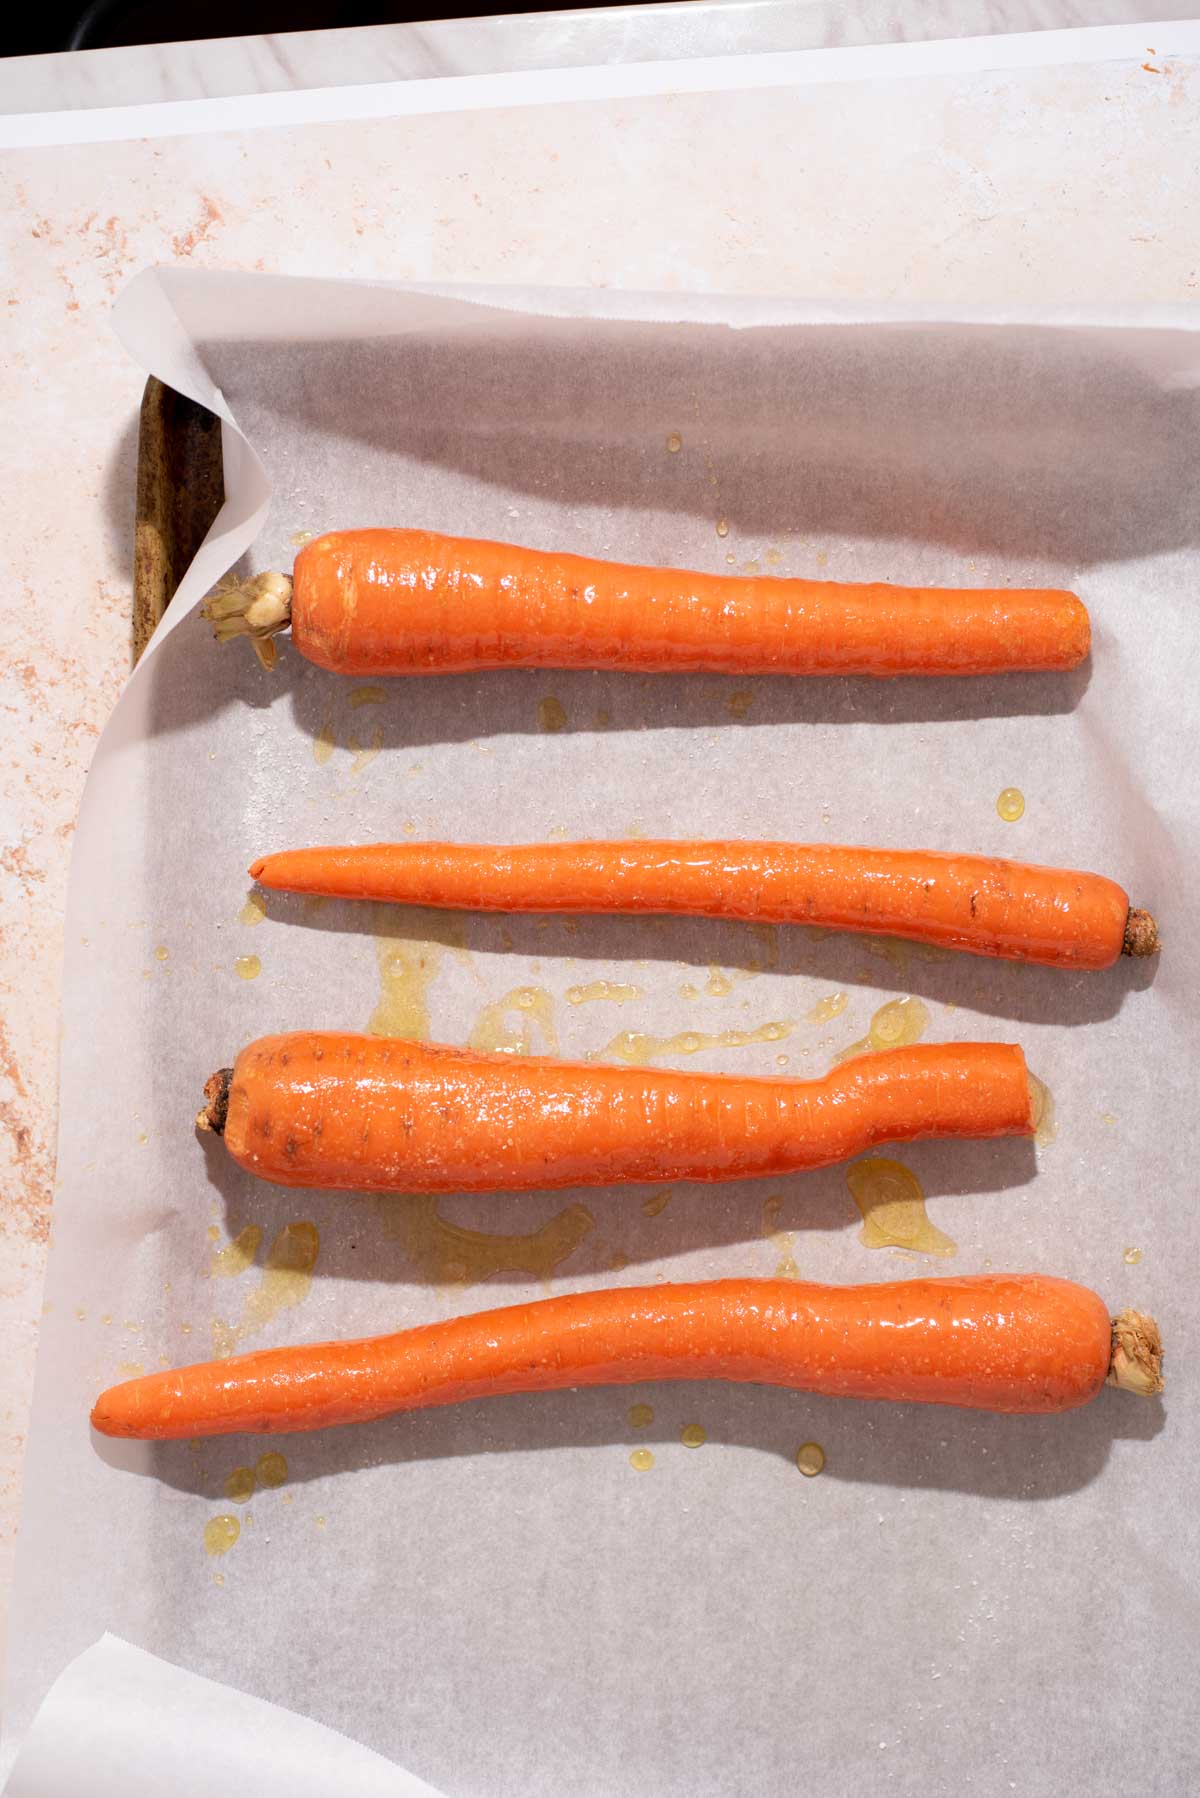 Four whole carrots on parchment paper lined baking sheet.